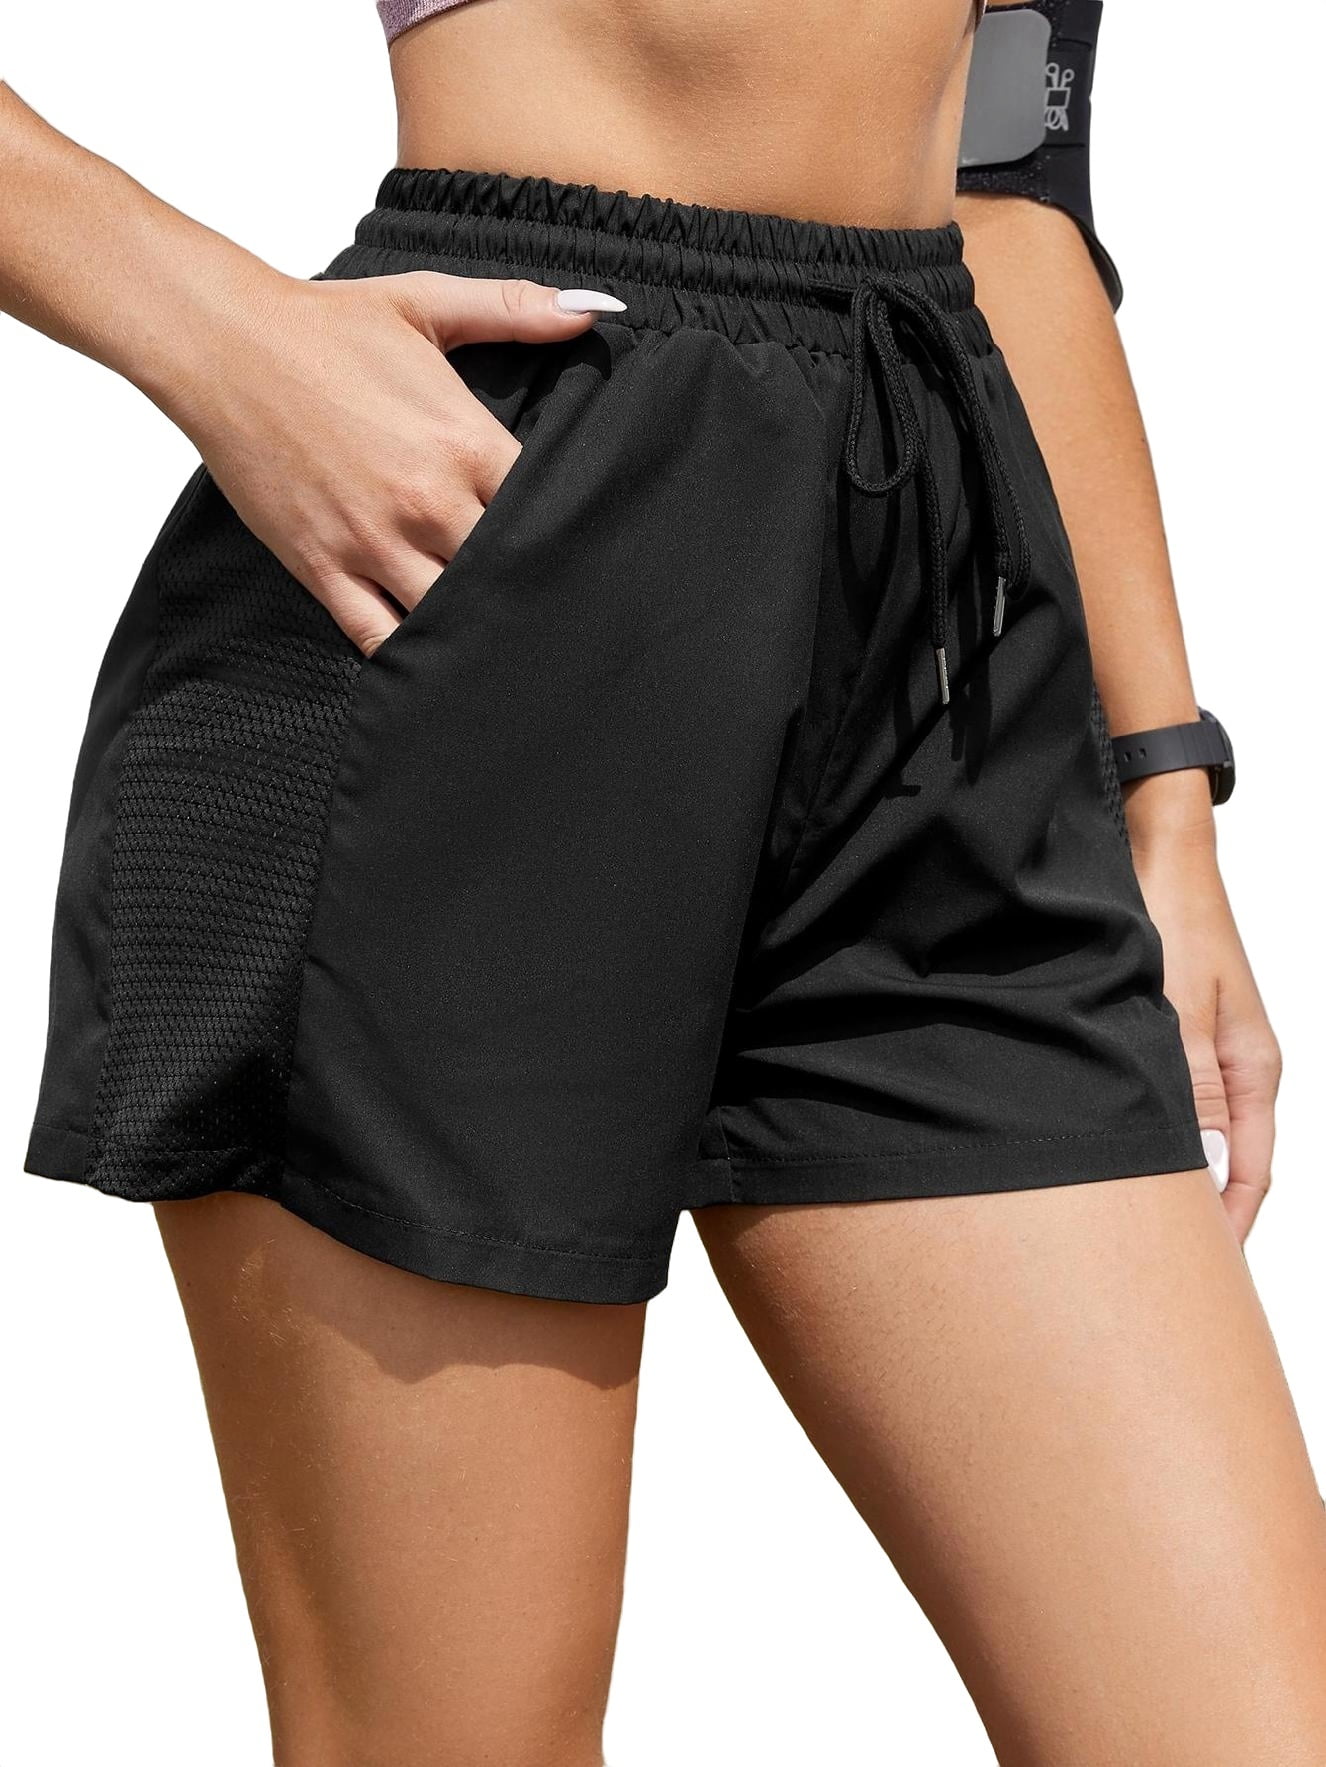 Womens Activewear Sports Shorts Softness Solid Shorts with Phone Pocket  Black XS